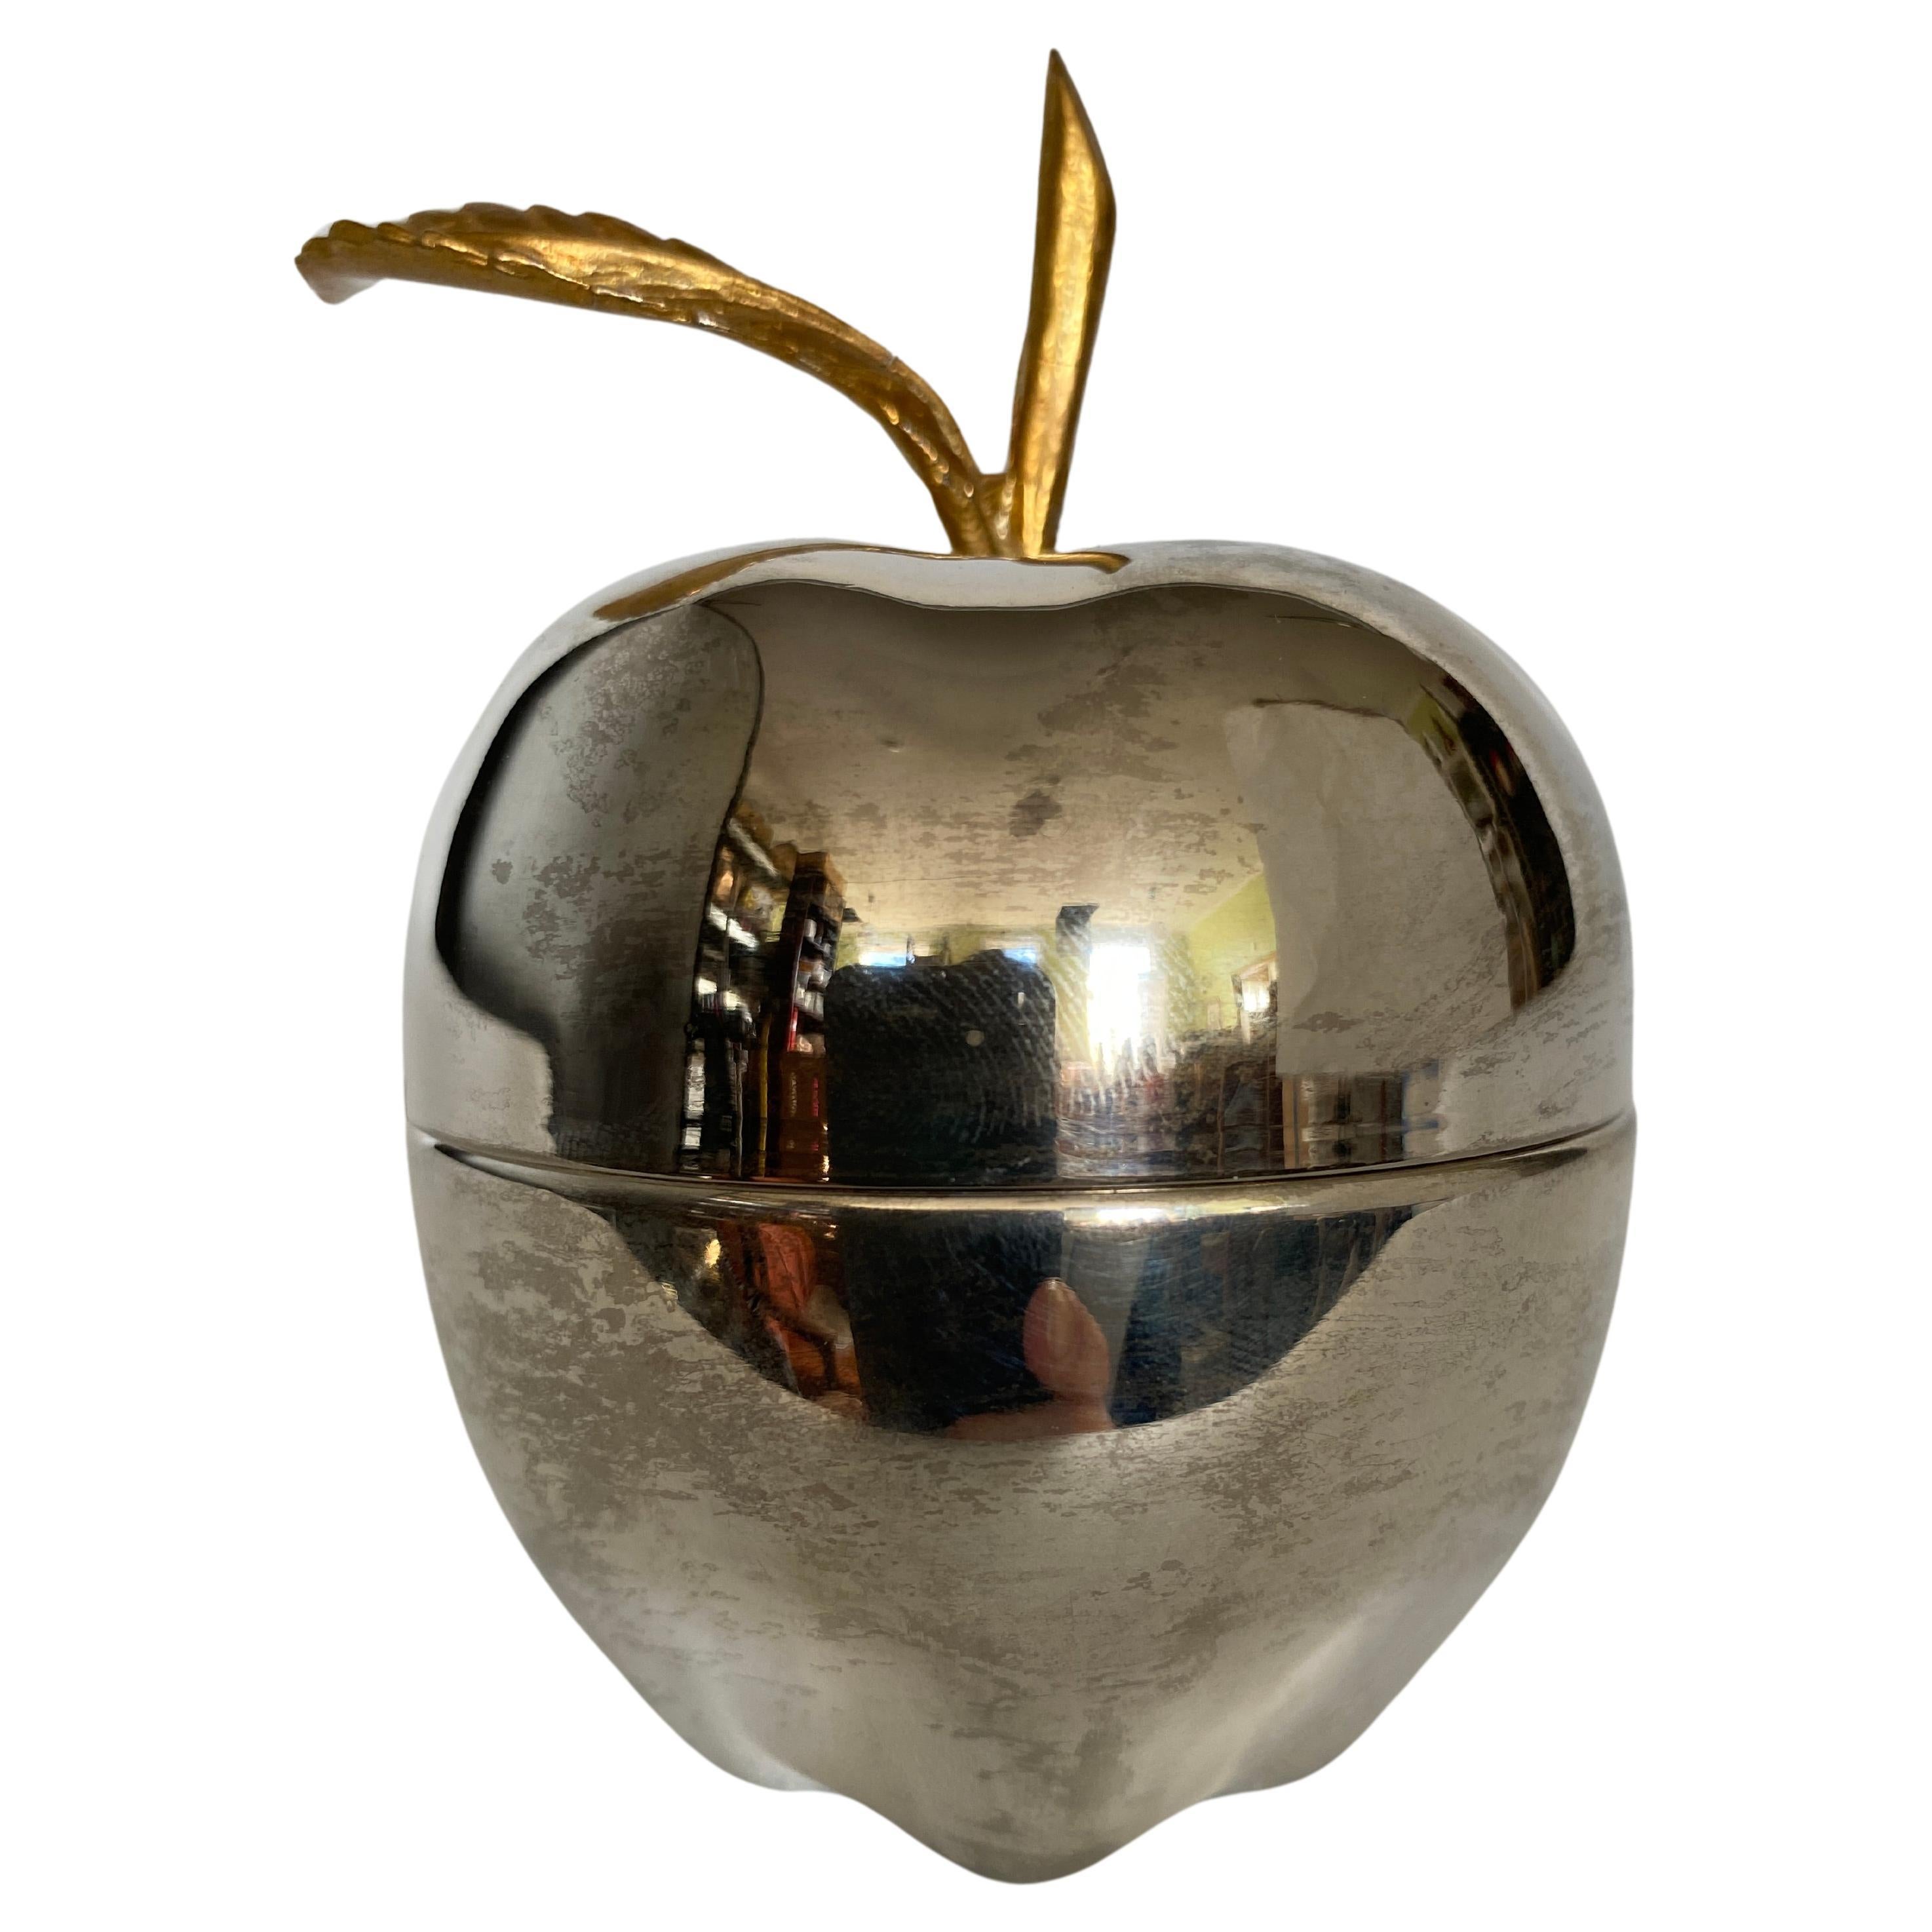 Lovely Hollywood Regency trinket box or bonbonniere in shape of an apple. The apple is silver plated and the leaf and branch is made of brass. 
The apple box has been polished. 
The last 2 pictures shows the apple box before polishing, showing